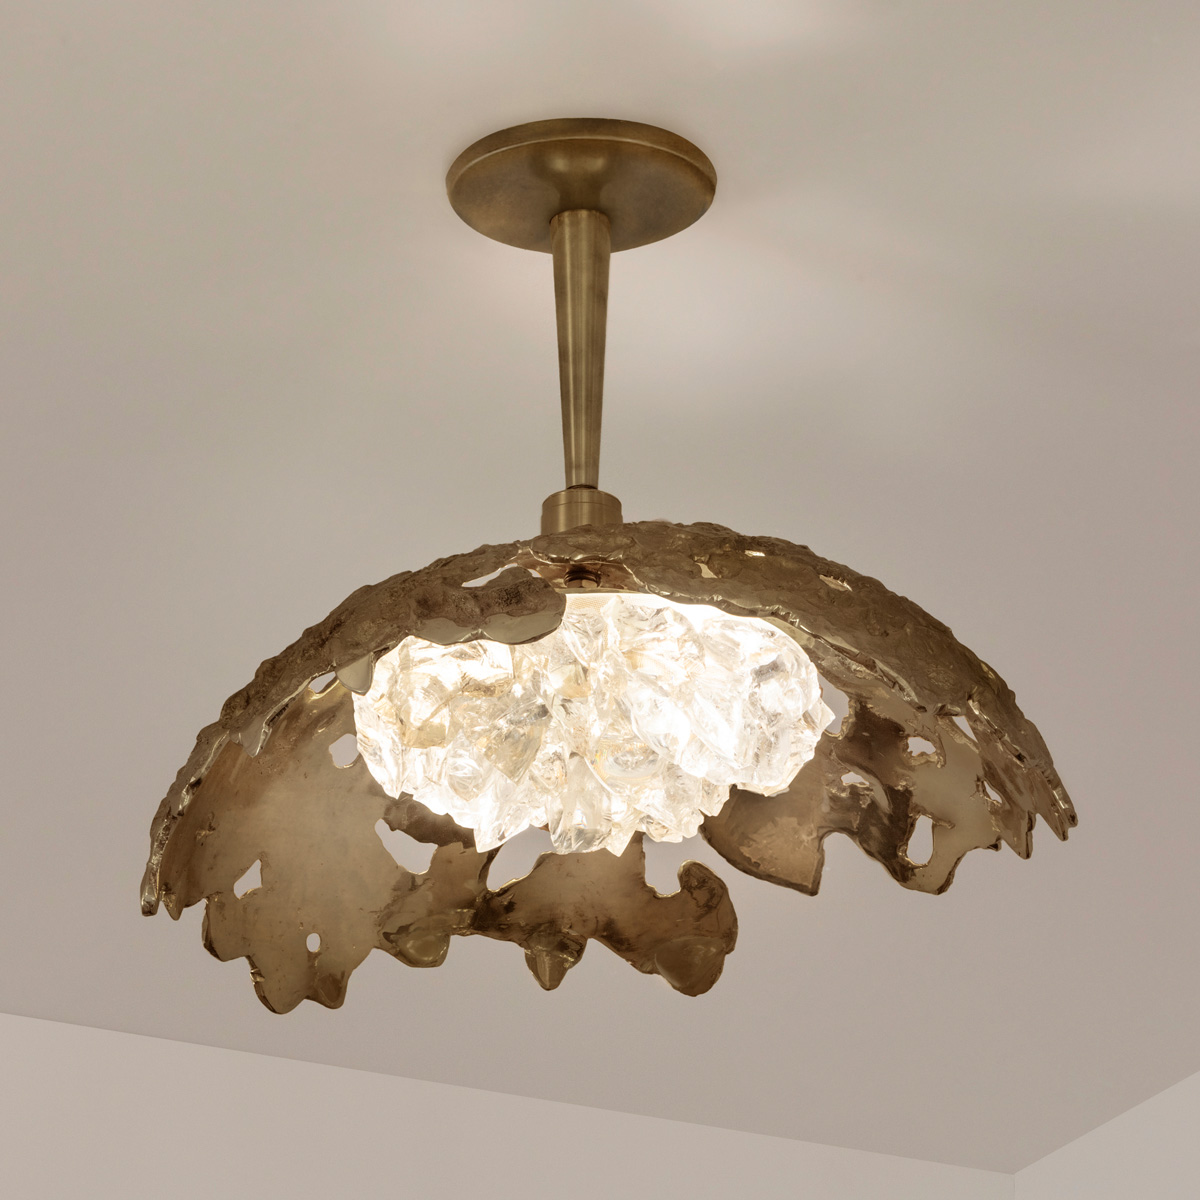 Etna N.15 ceiling light by gaspare asaro